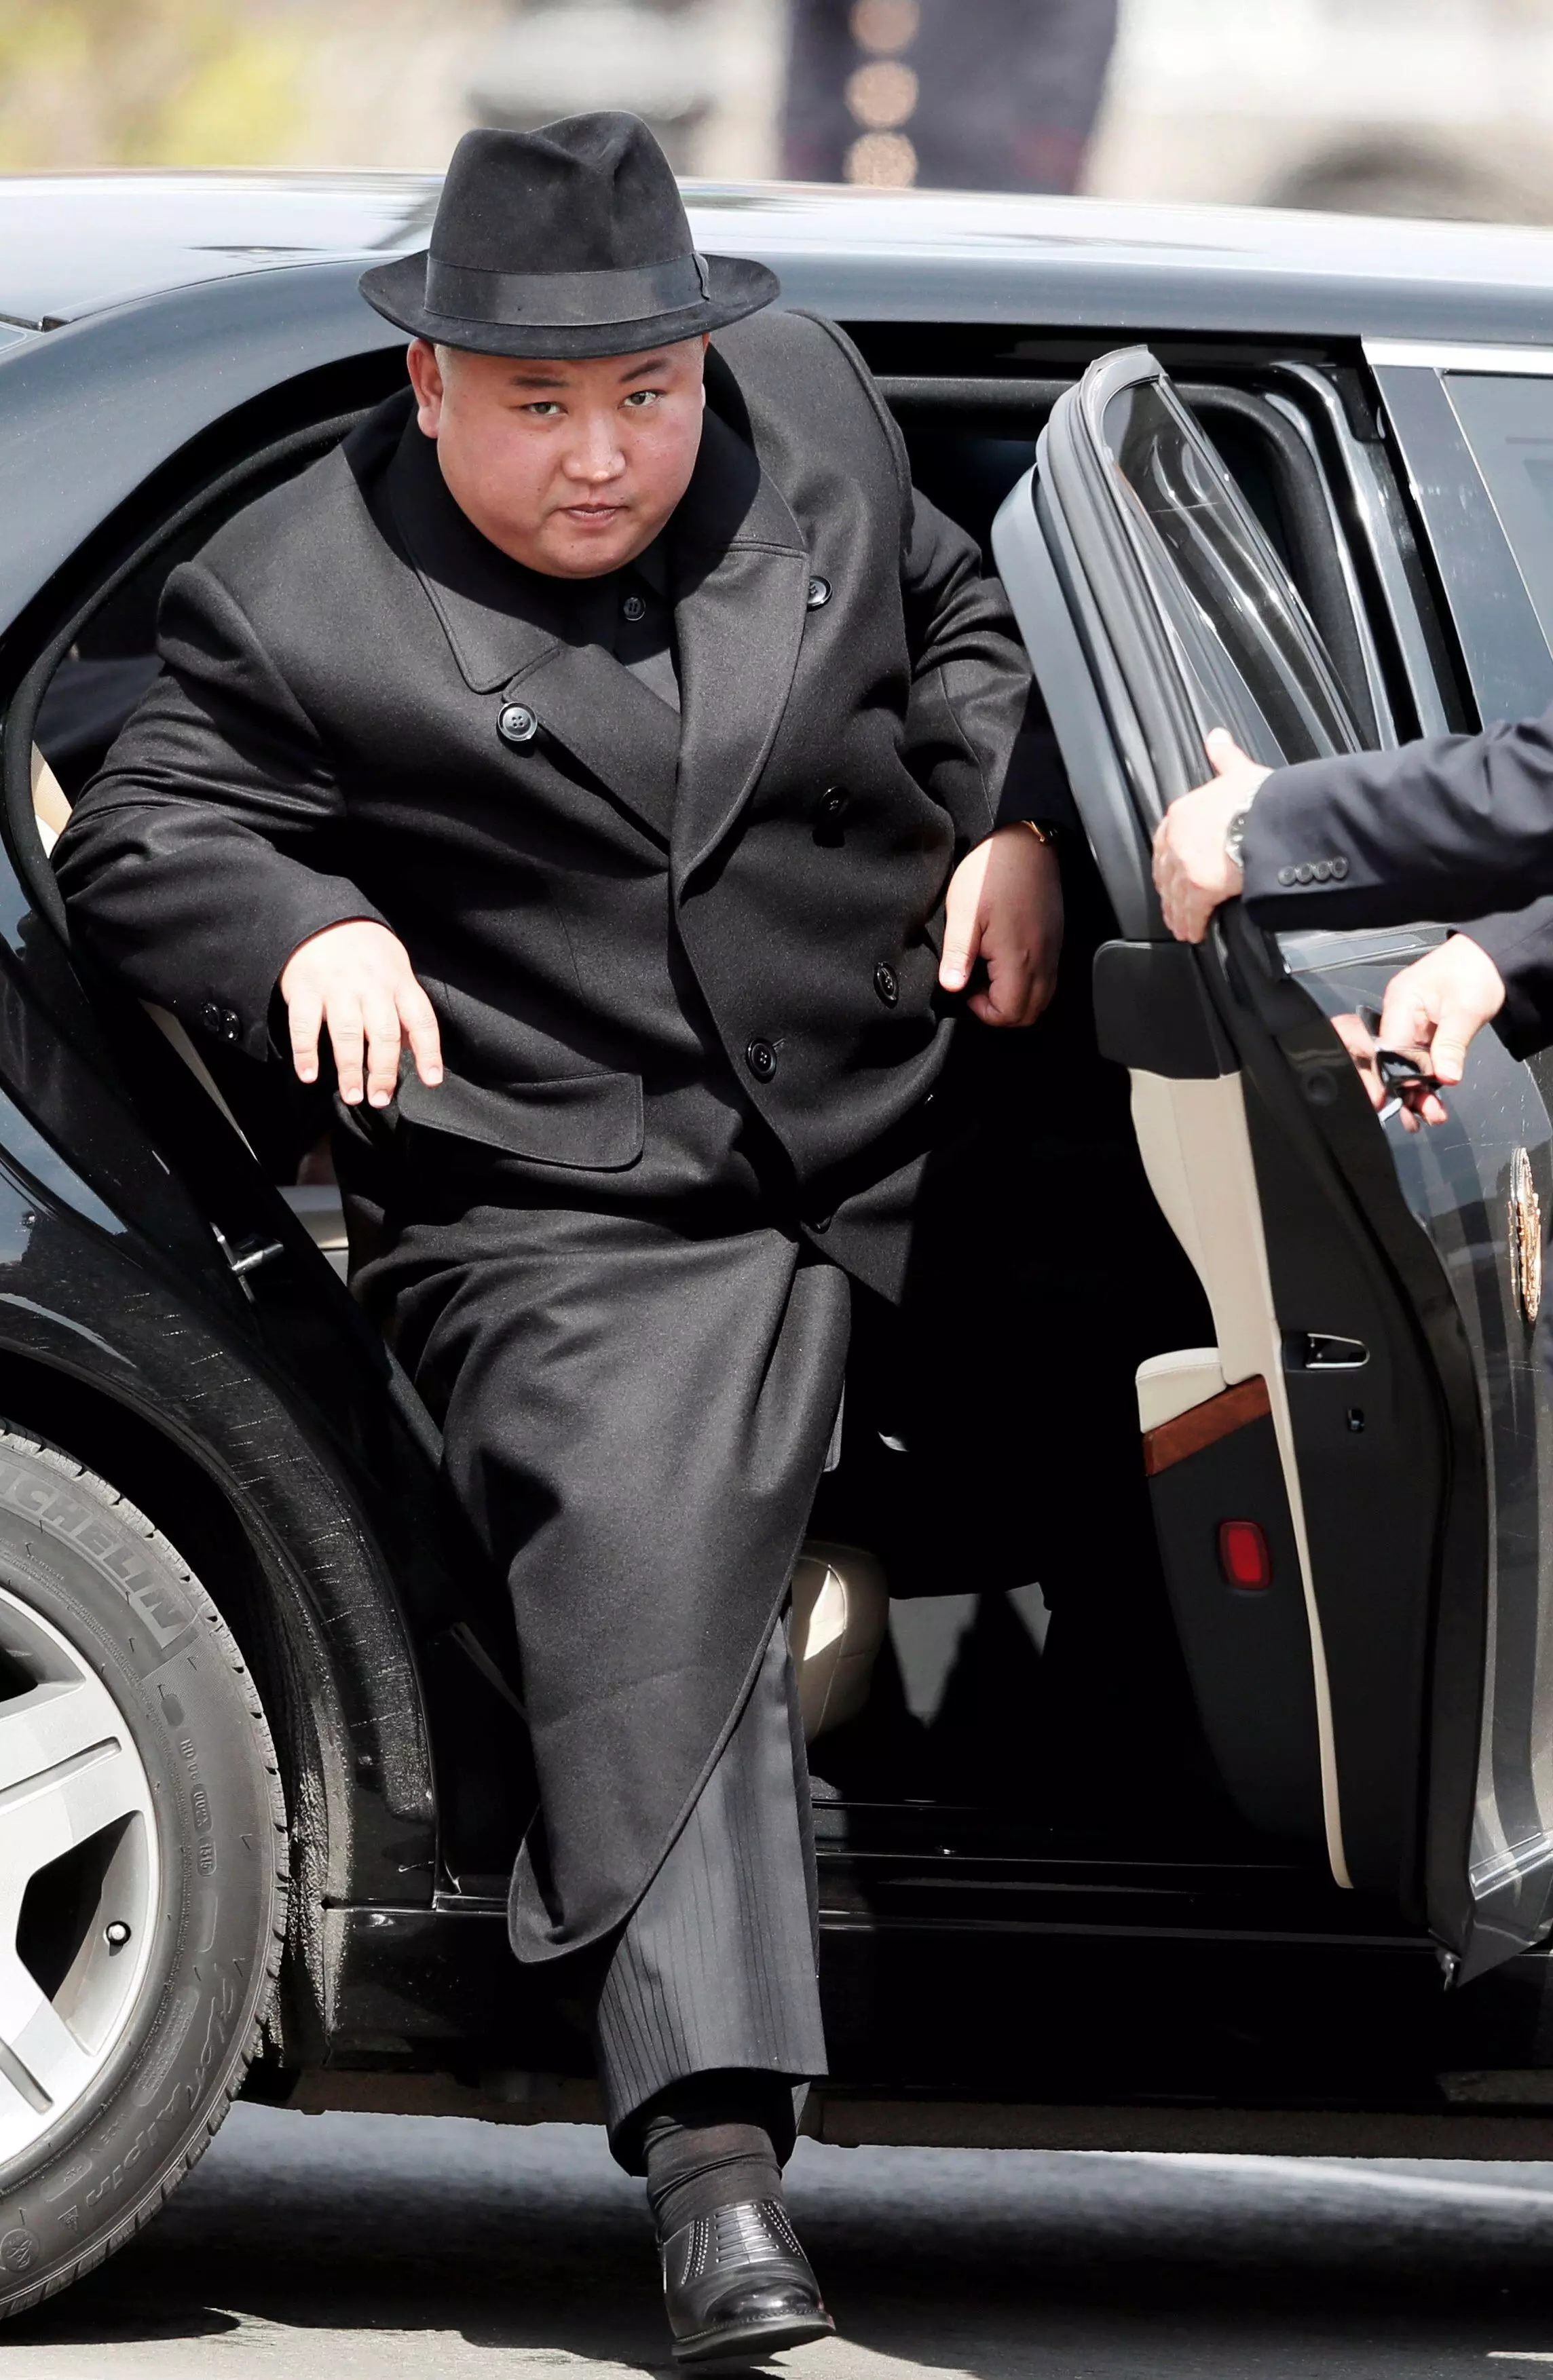 Kim has rocked several fancy coats during his time as leader.